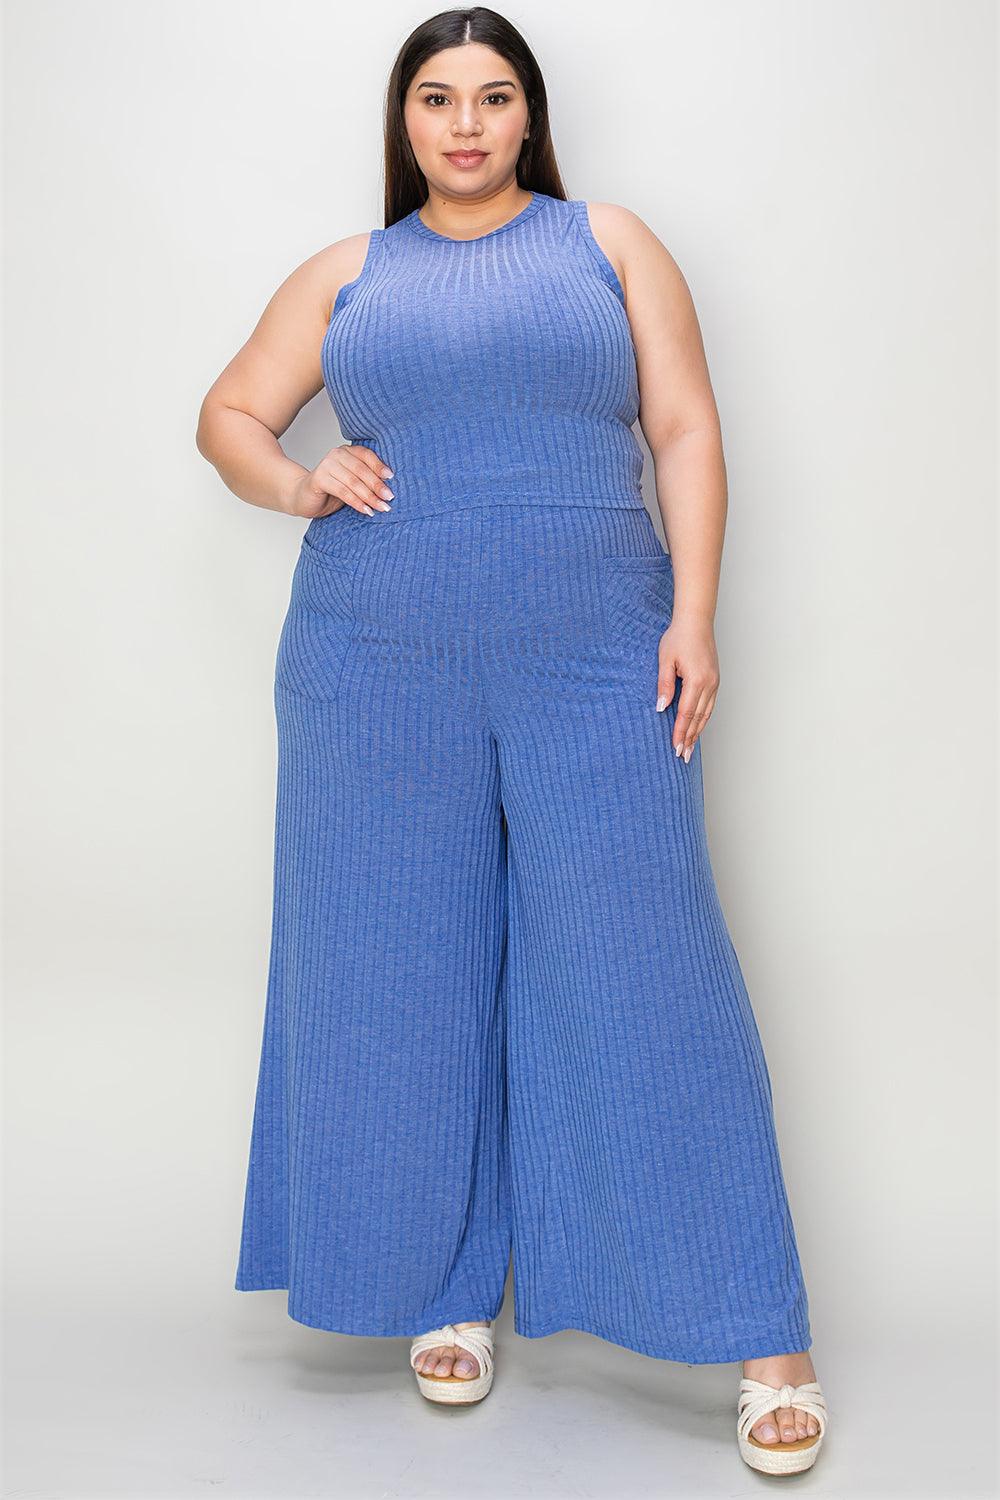 Ribbed Tank and Wide Leg Pants Set - Wildflower Hippies